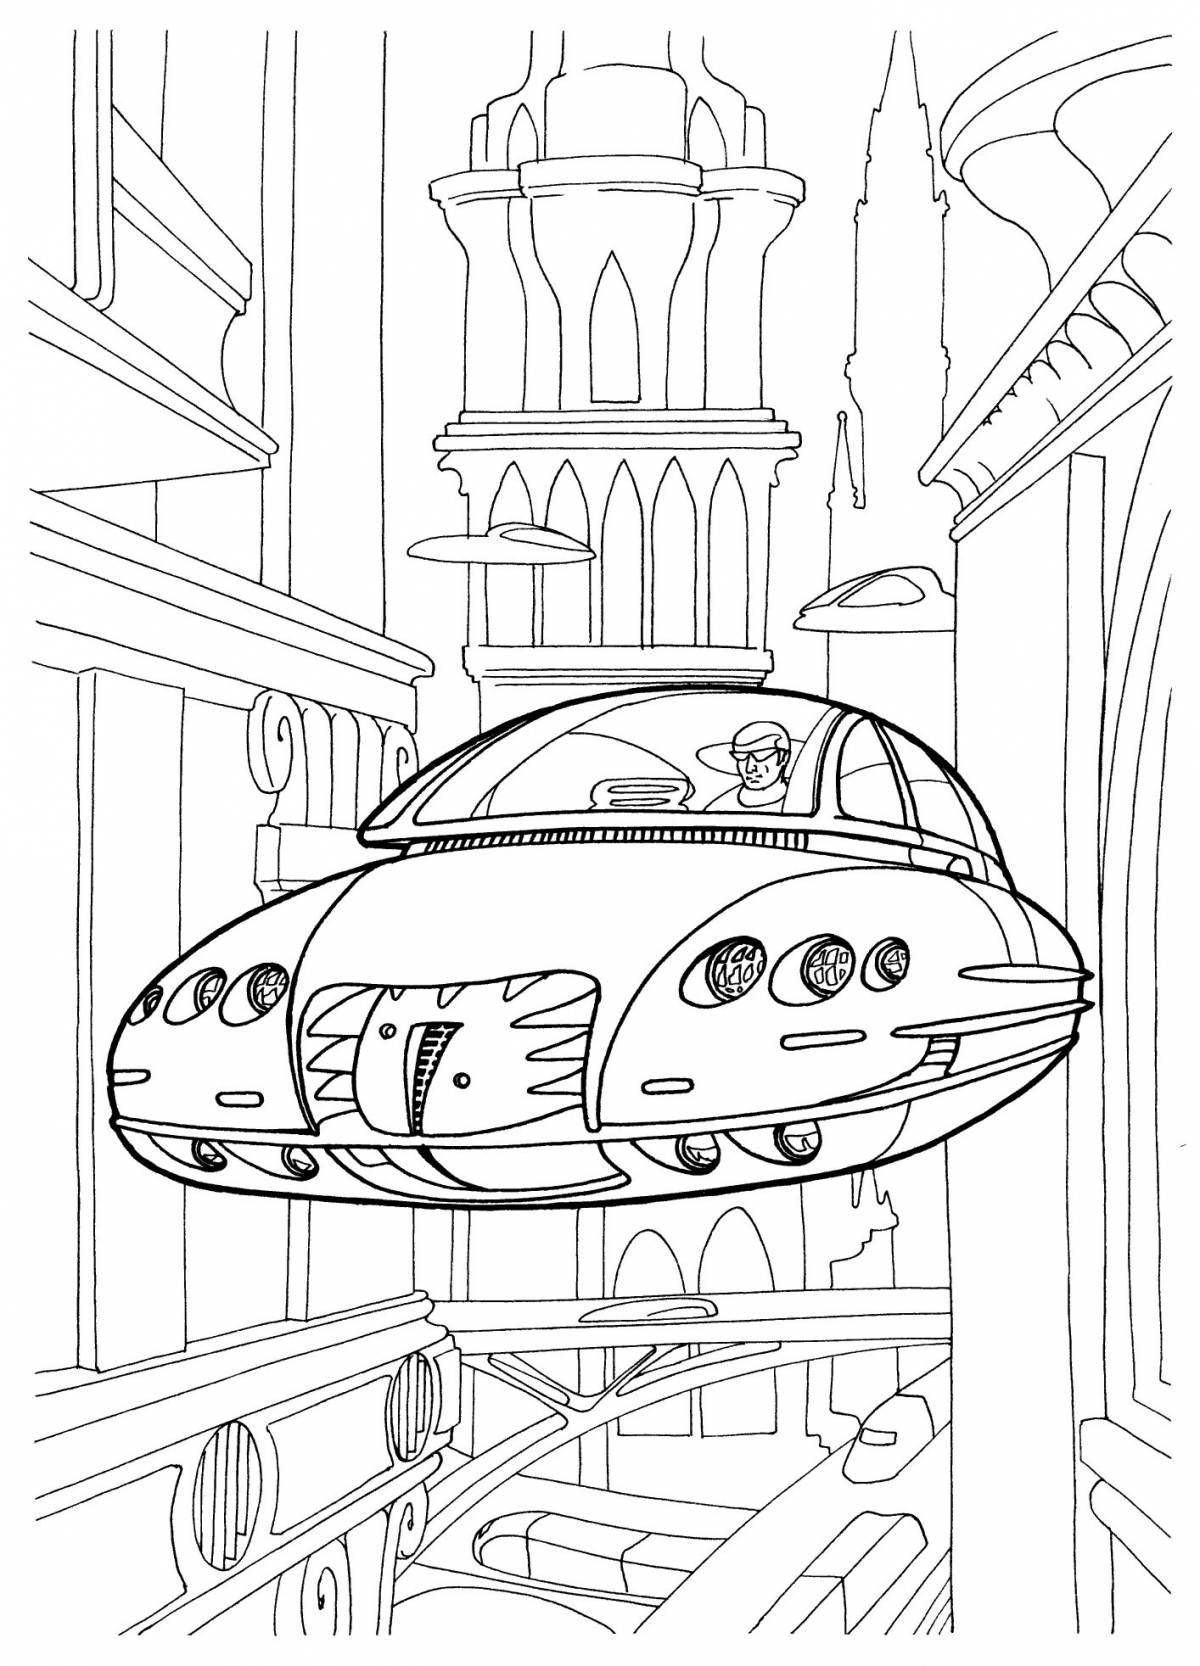 Time machine coloring book for kids